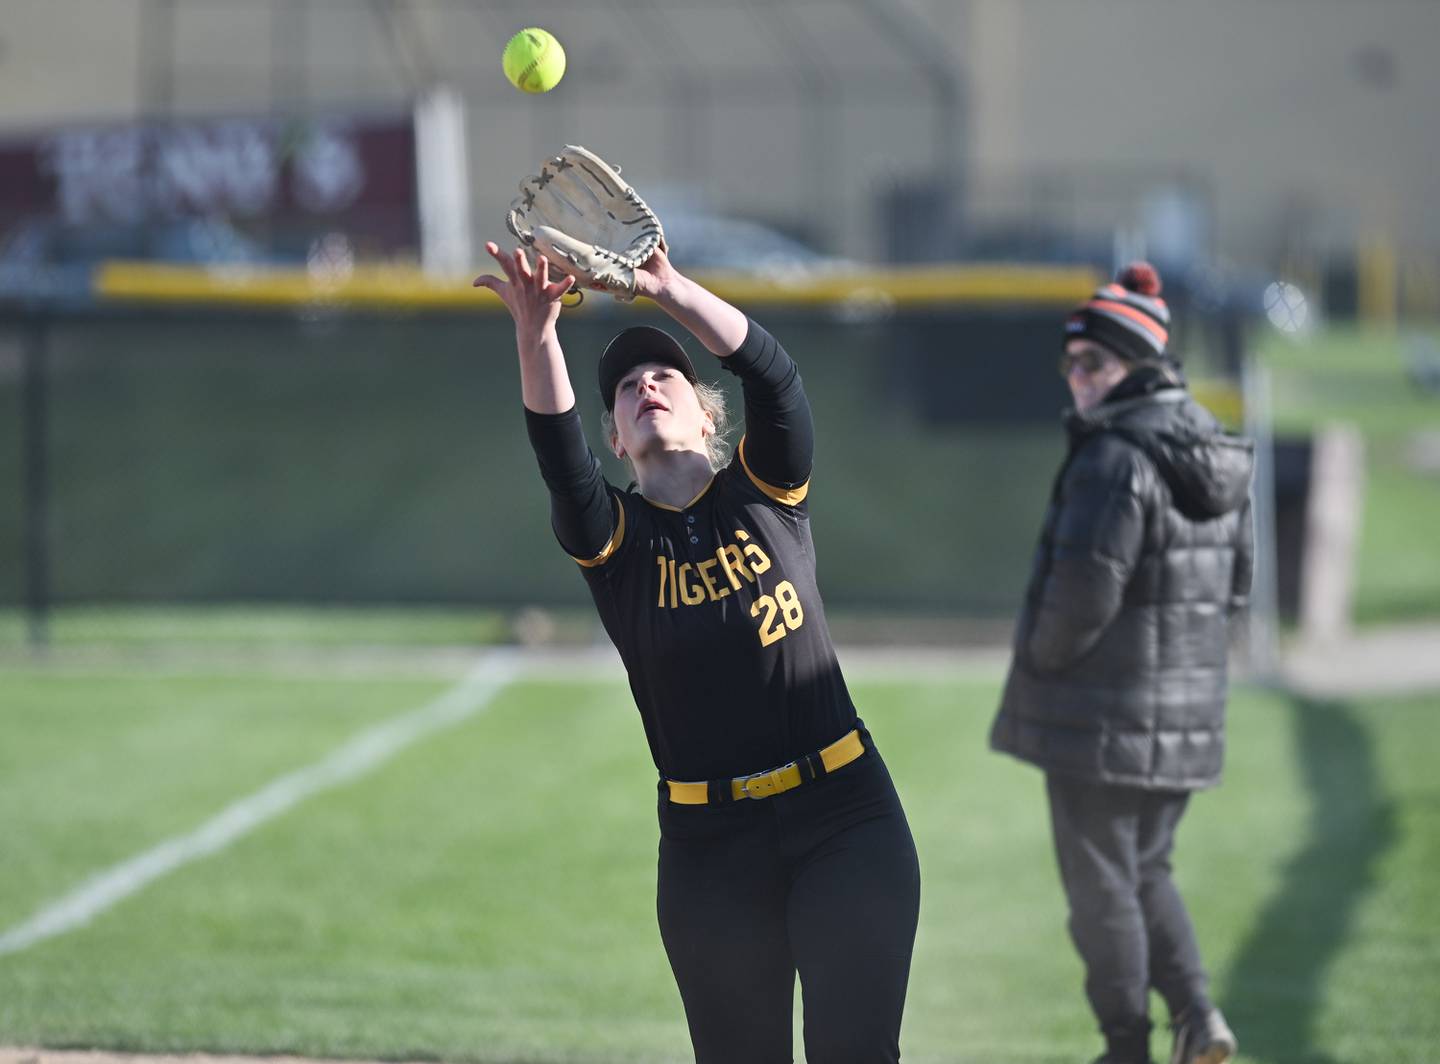 Joliet West's Brooke Schwall makes a catch during the conference game against Minooka on Wednesday, April. 26, 2023, at Joliet.